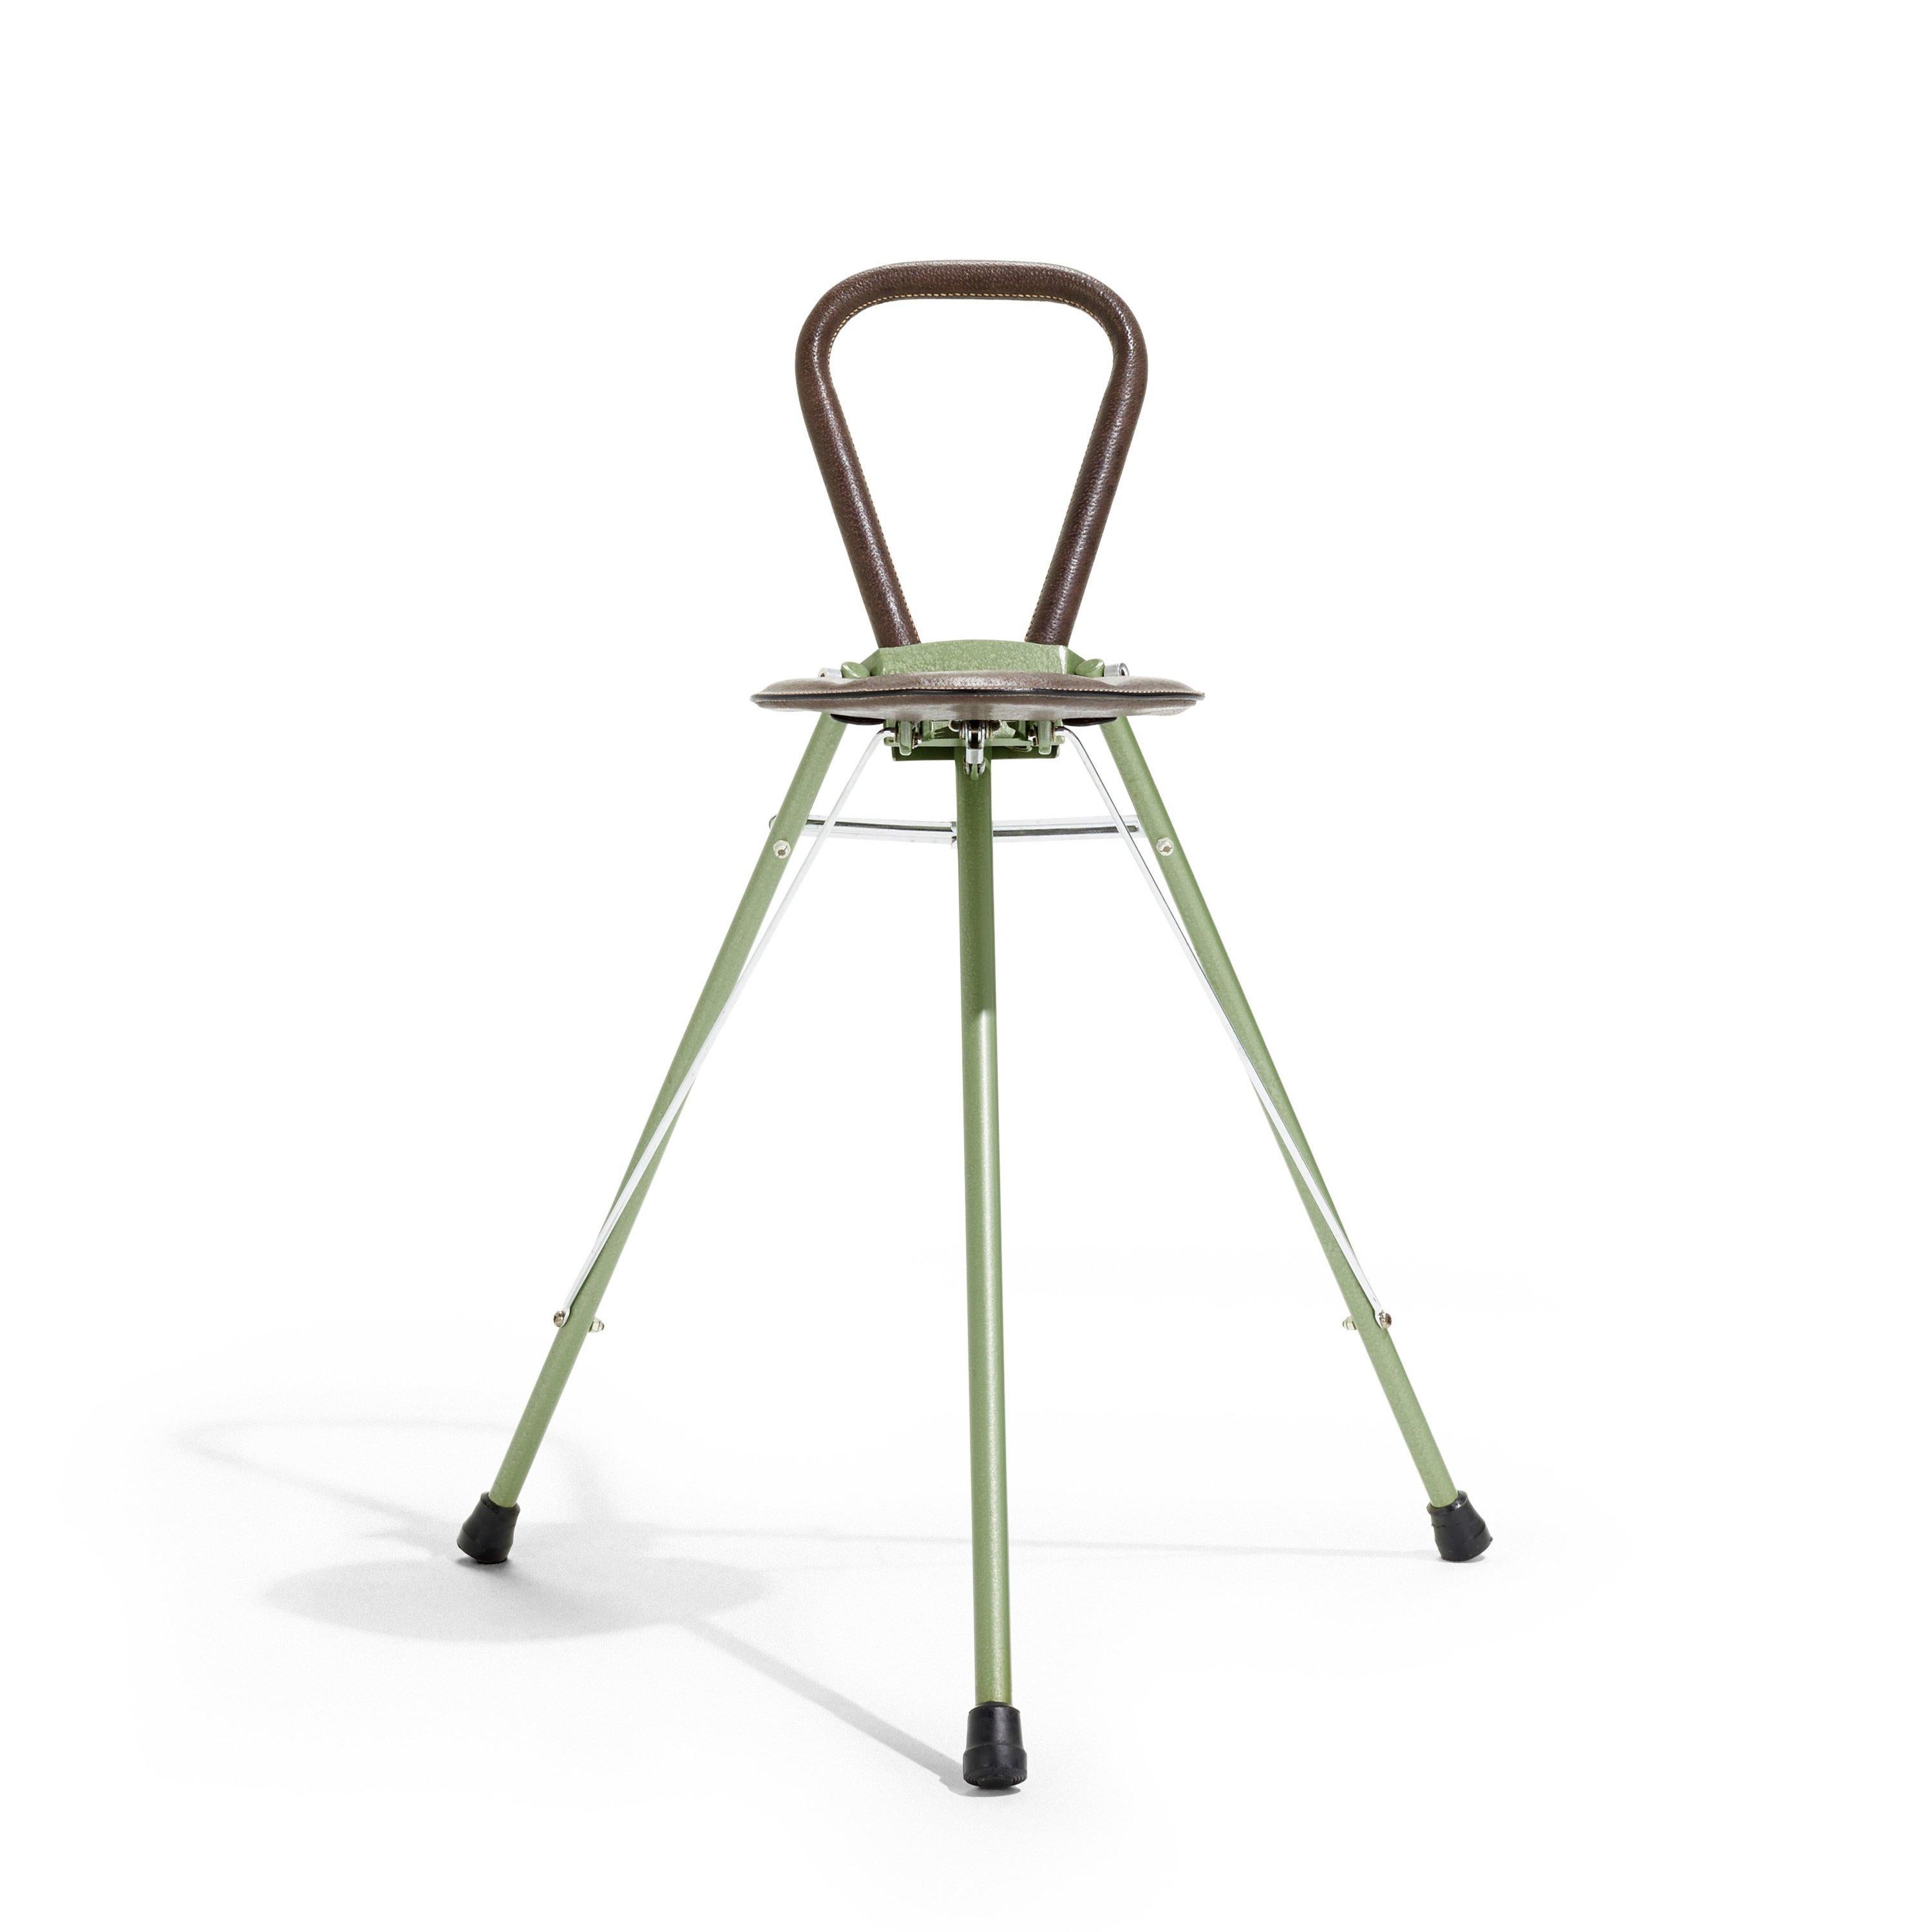 How chic is this vintage Gucci stool. And it folds up and converts into a cane for hiking around in style.

Signed to underside ‘Made in Italy by Gucci’.